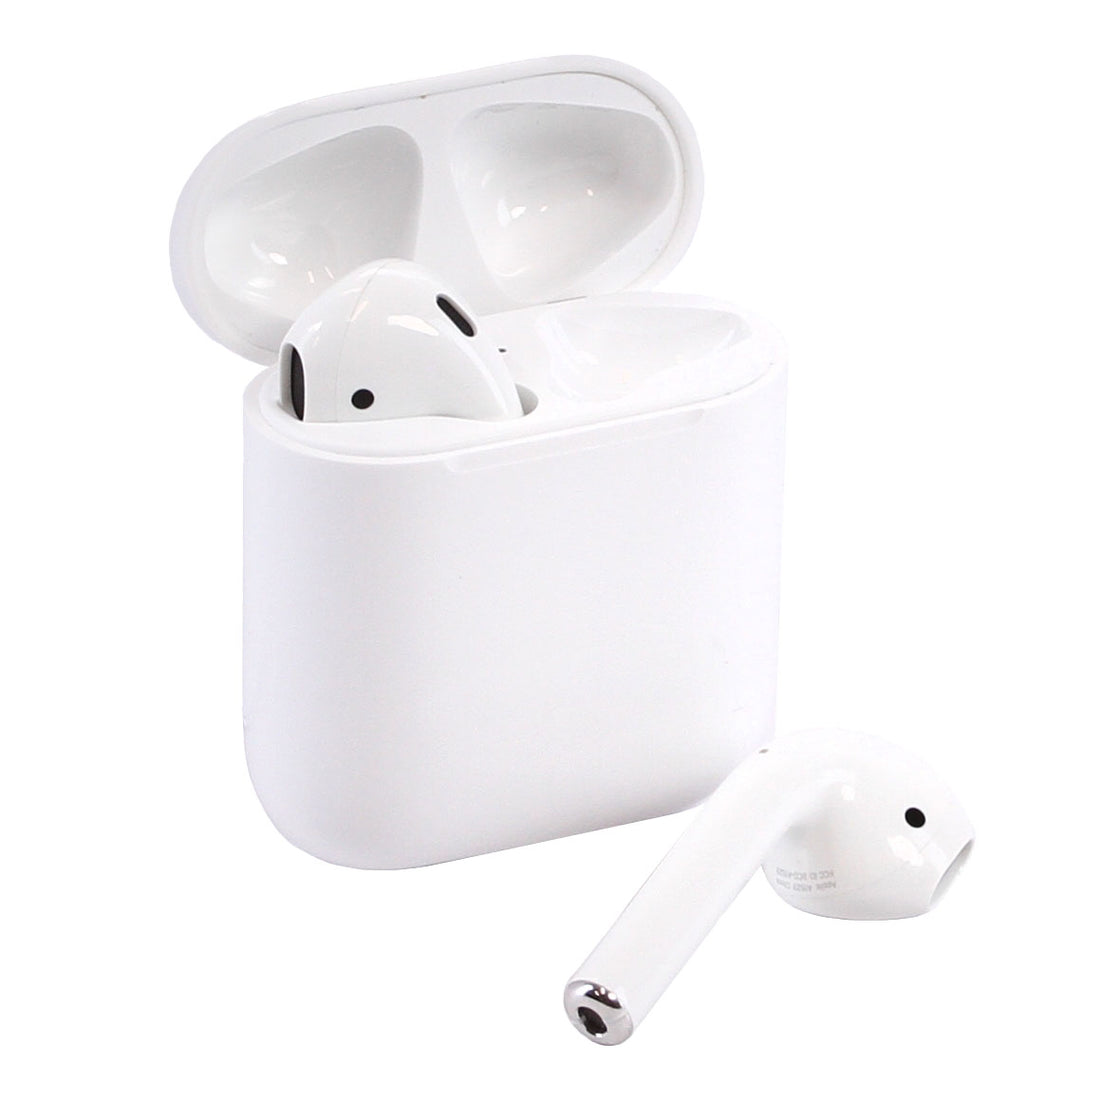 Apple AirPods 2 with Charging Case &amp; MFI Cable - White (Refurbished)